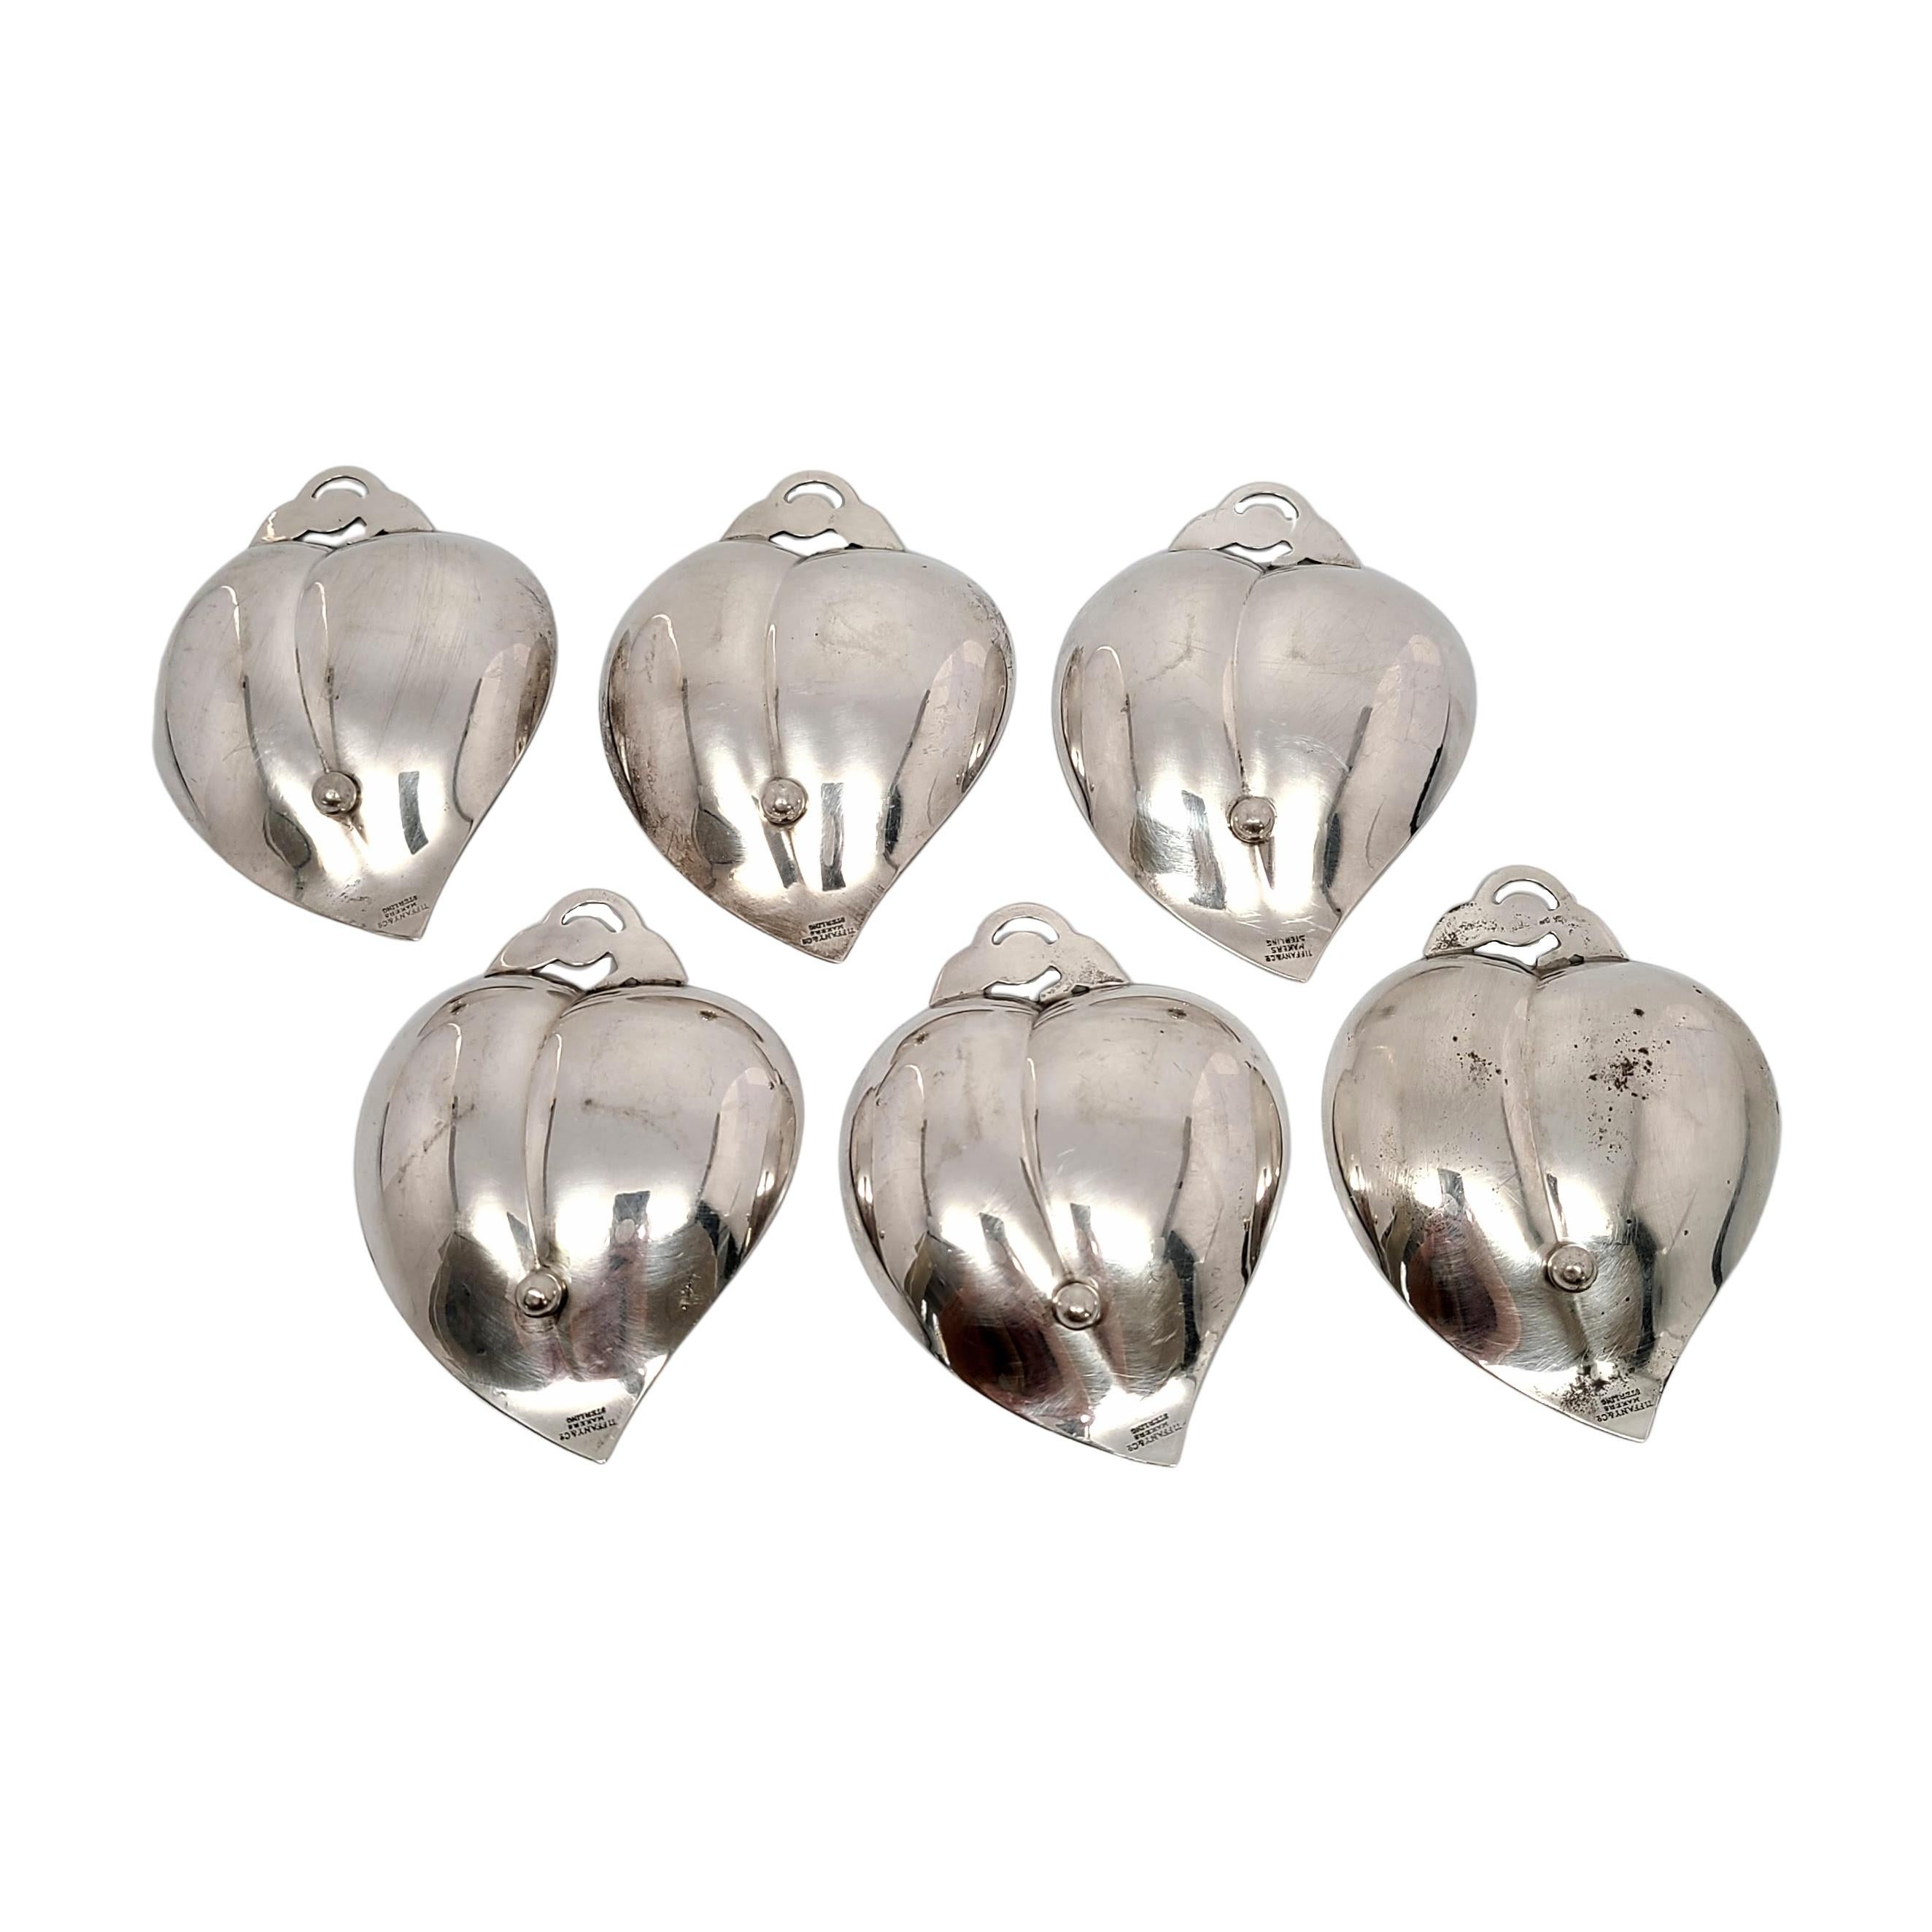 Set of 6 Tiffany & Co sterling silver small heart/apple shaped dishes.

Six small dishes in the shape of an apple or heart with openwork scroll leaf and 1 ball foot underneath. Does not include Tiffany & Co box or pouch.

Each dish measures approx 3